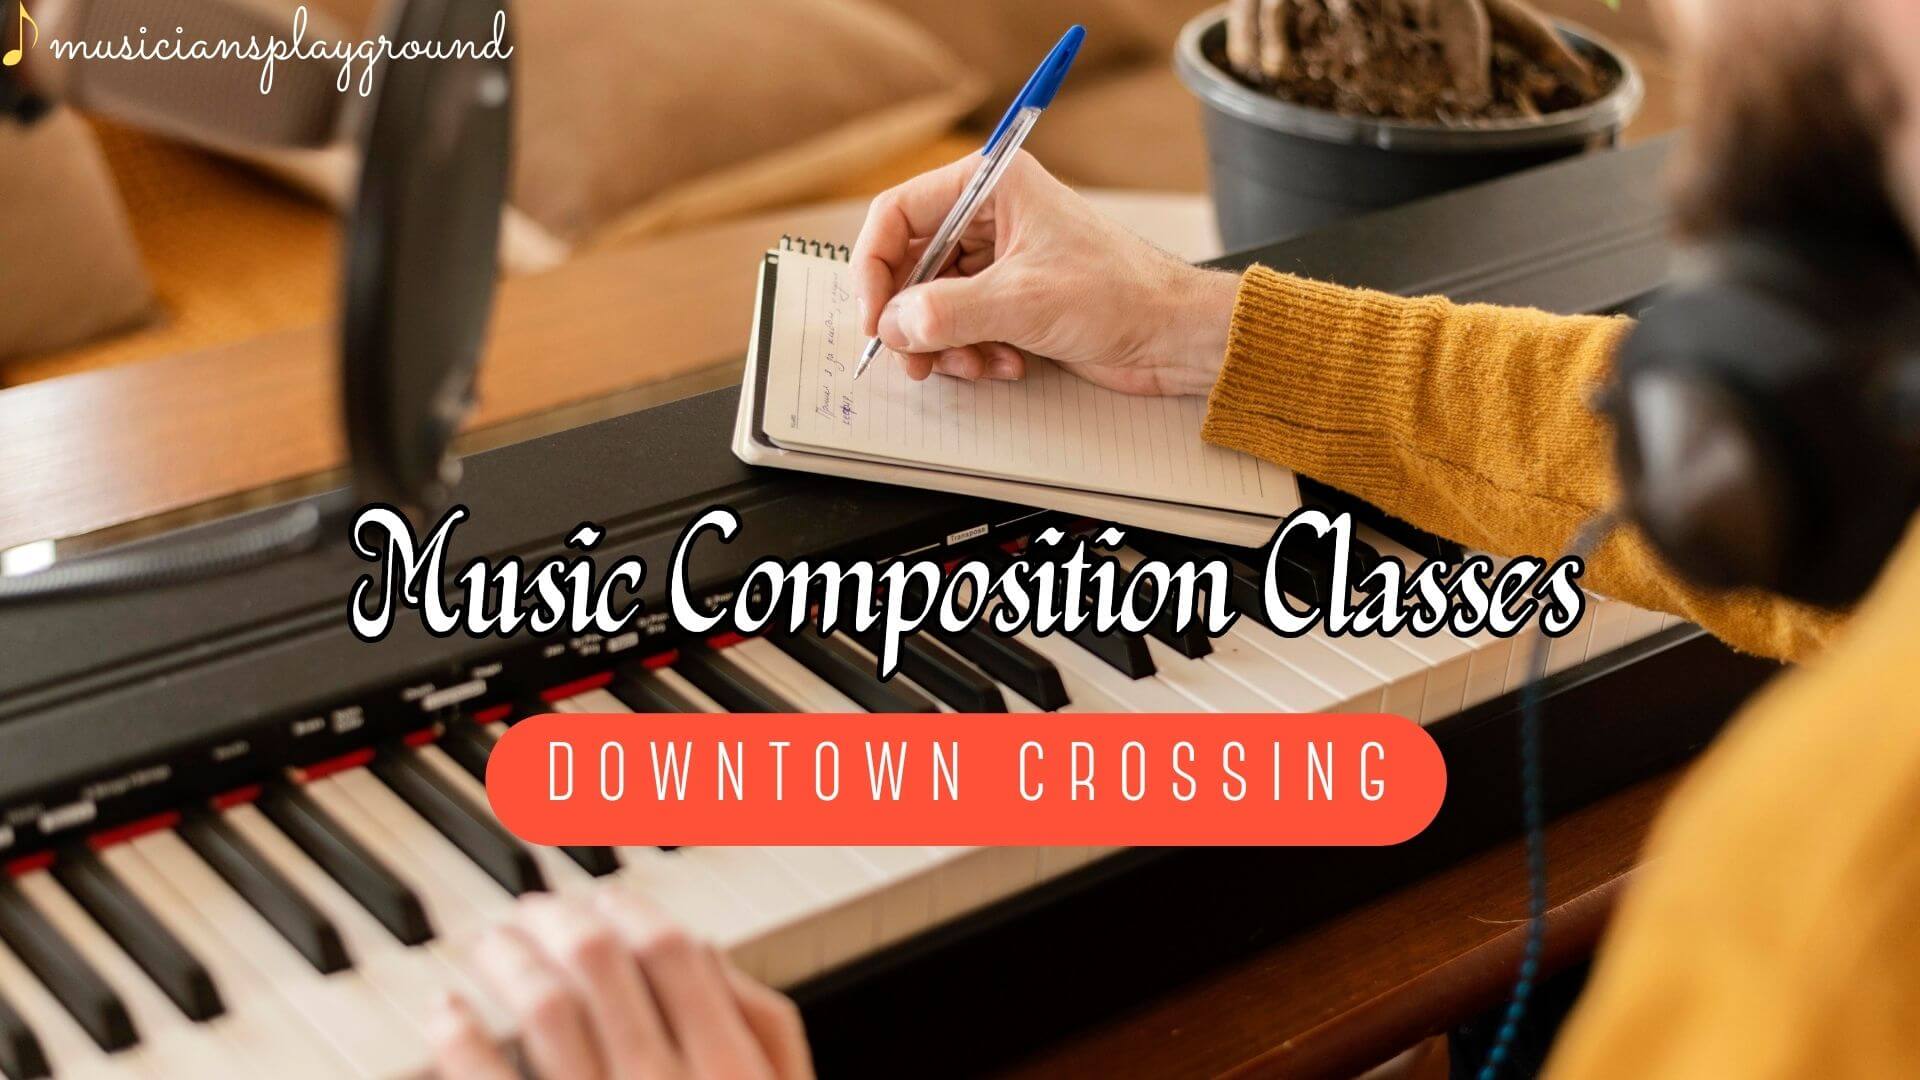 Music Composition Classes in Downtown Crossing, Massachusetts: Unlock Your Musical Potential at Musicians Playground